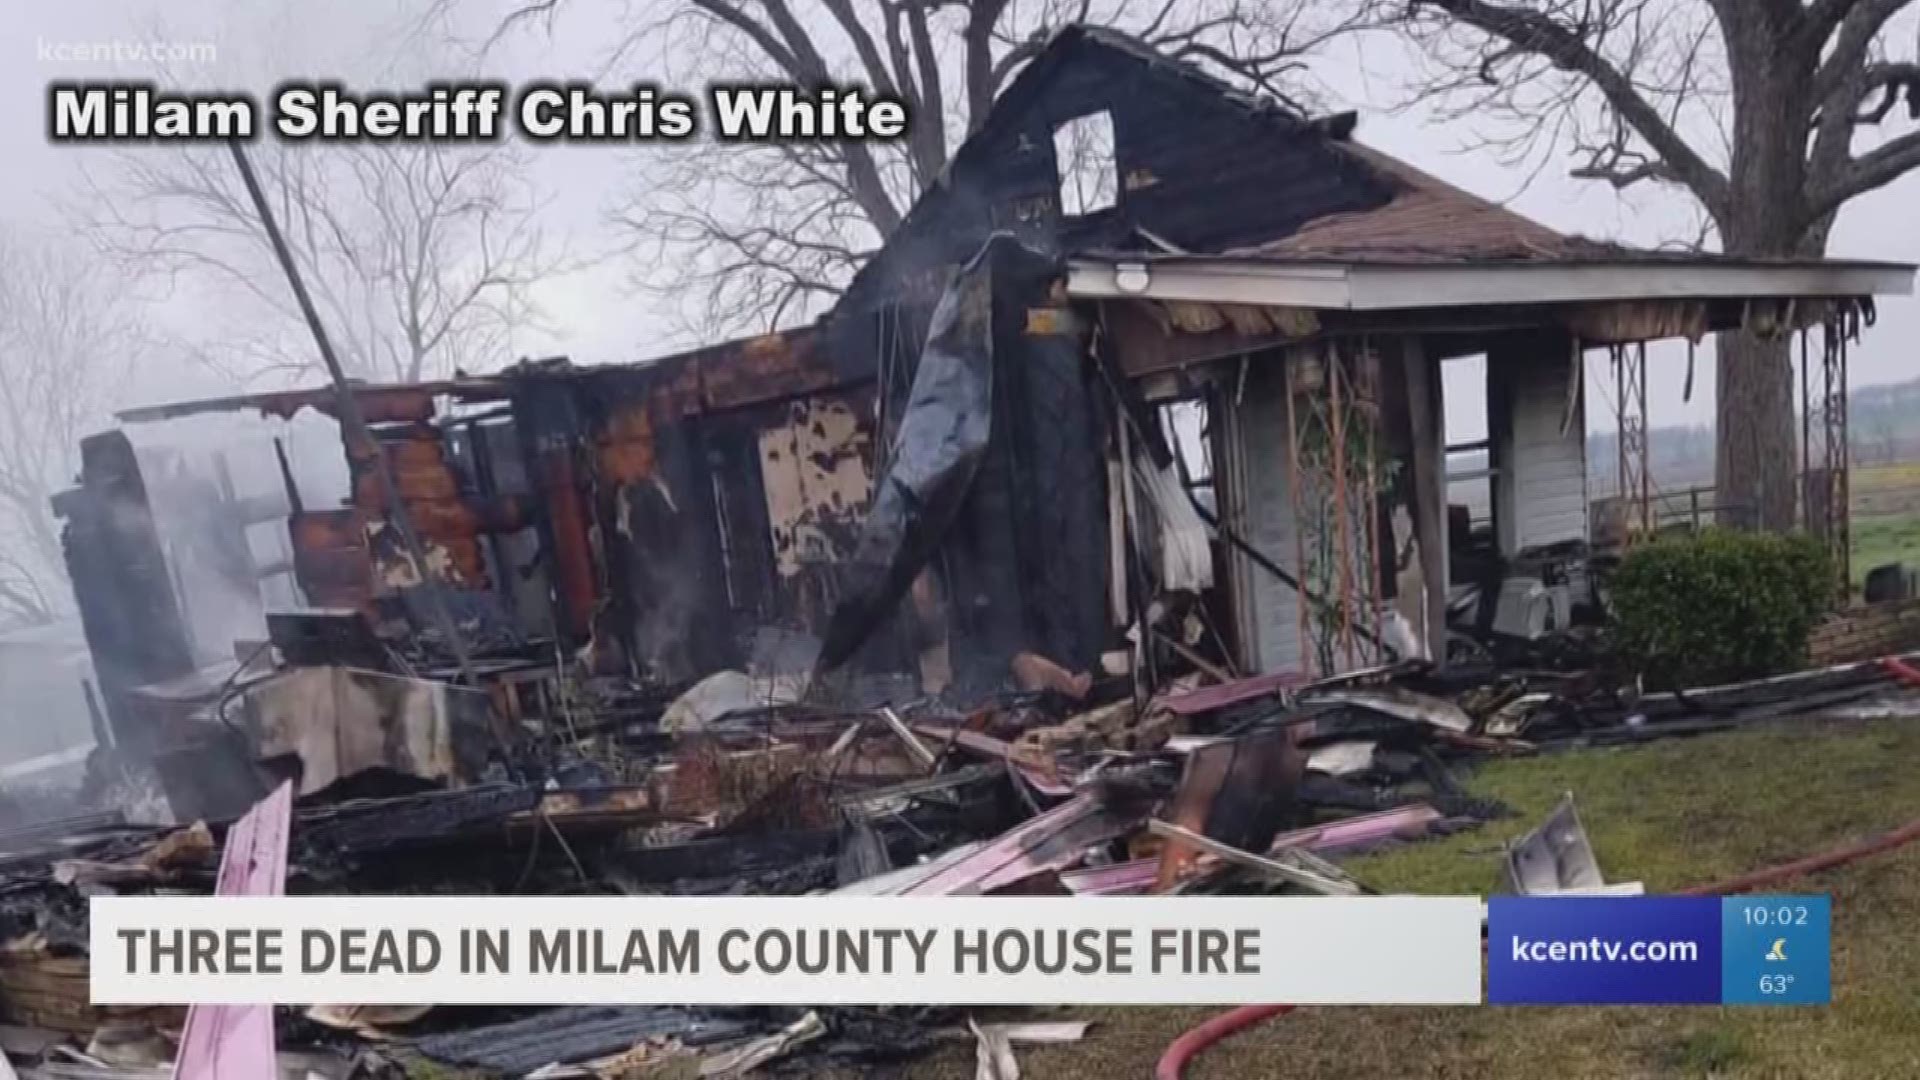 According to the Milam County Sheriff, information is leading the investigators to believe that a space-heater might have been the cause of the fire.